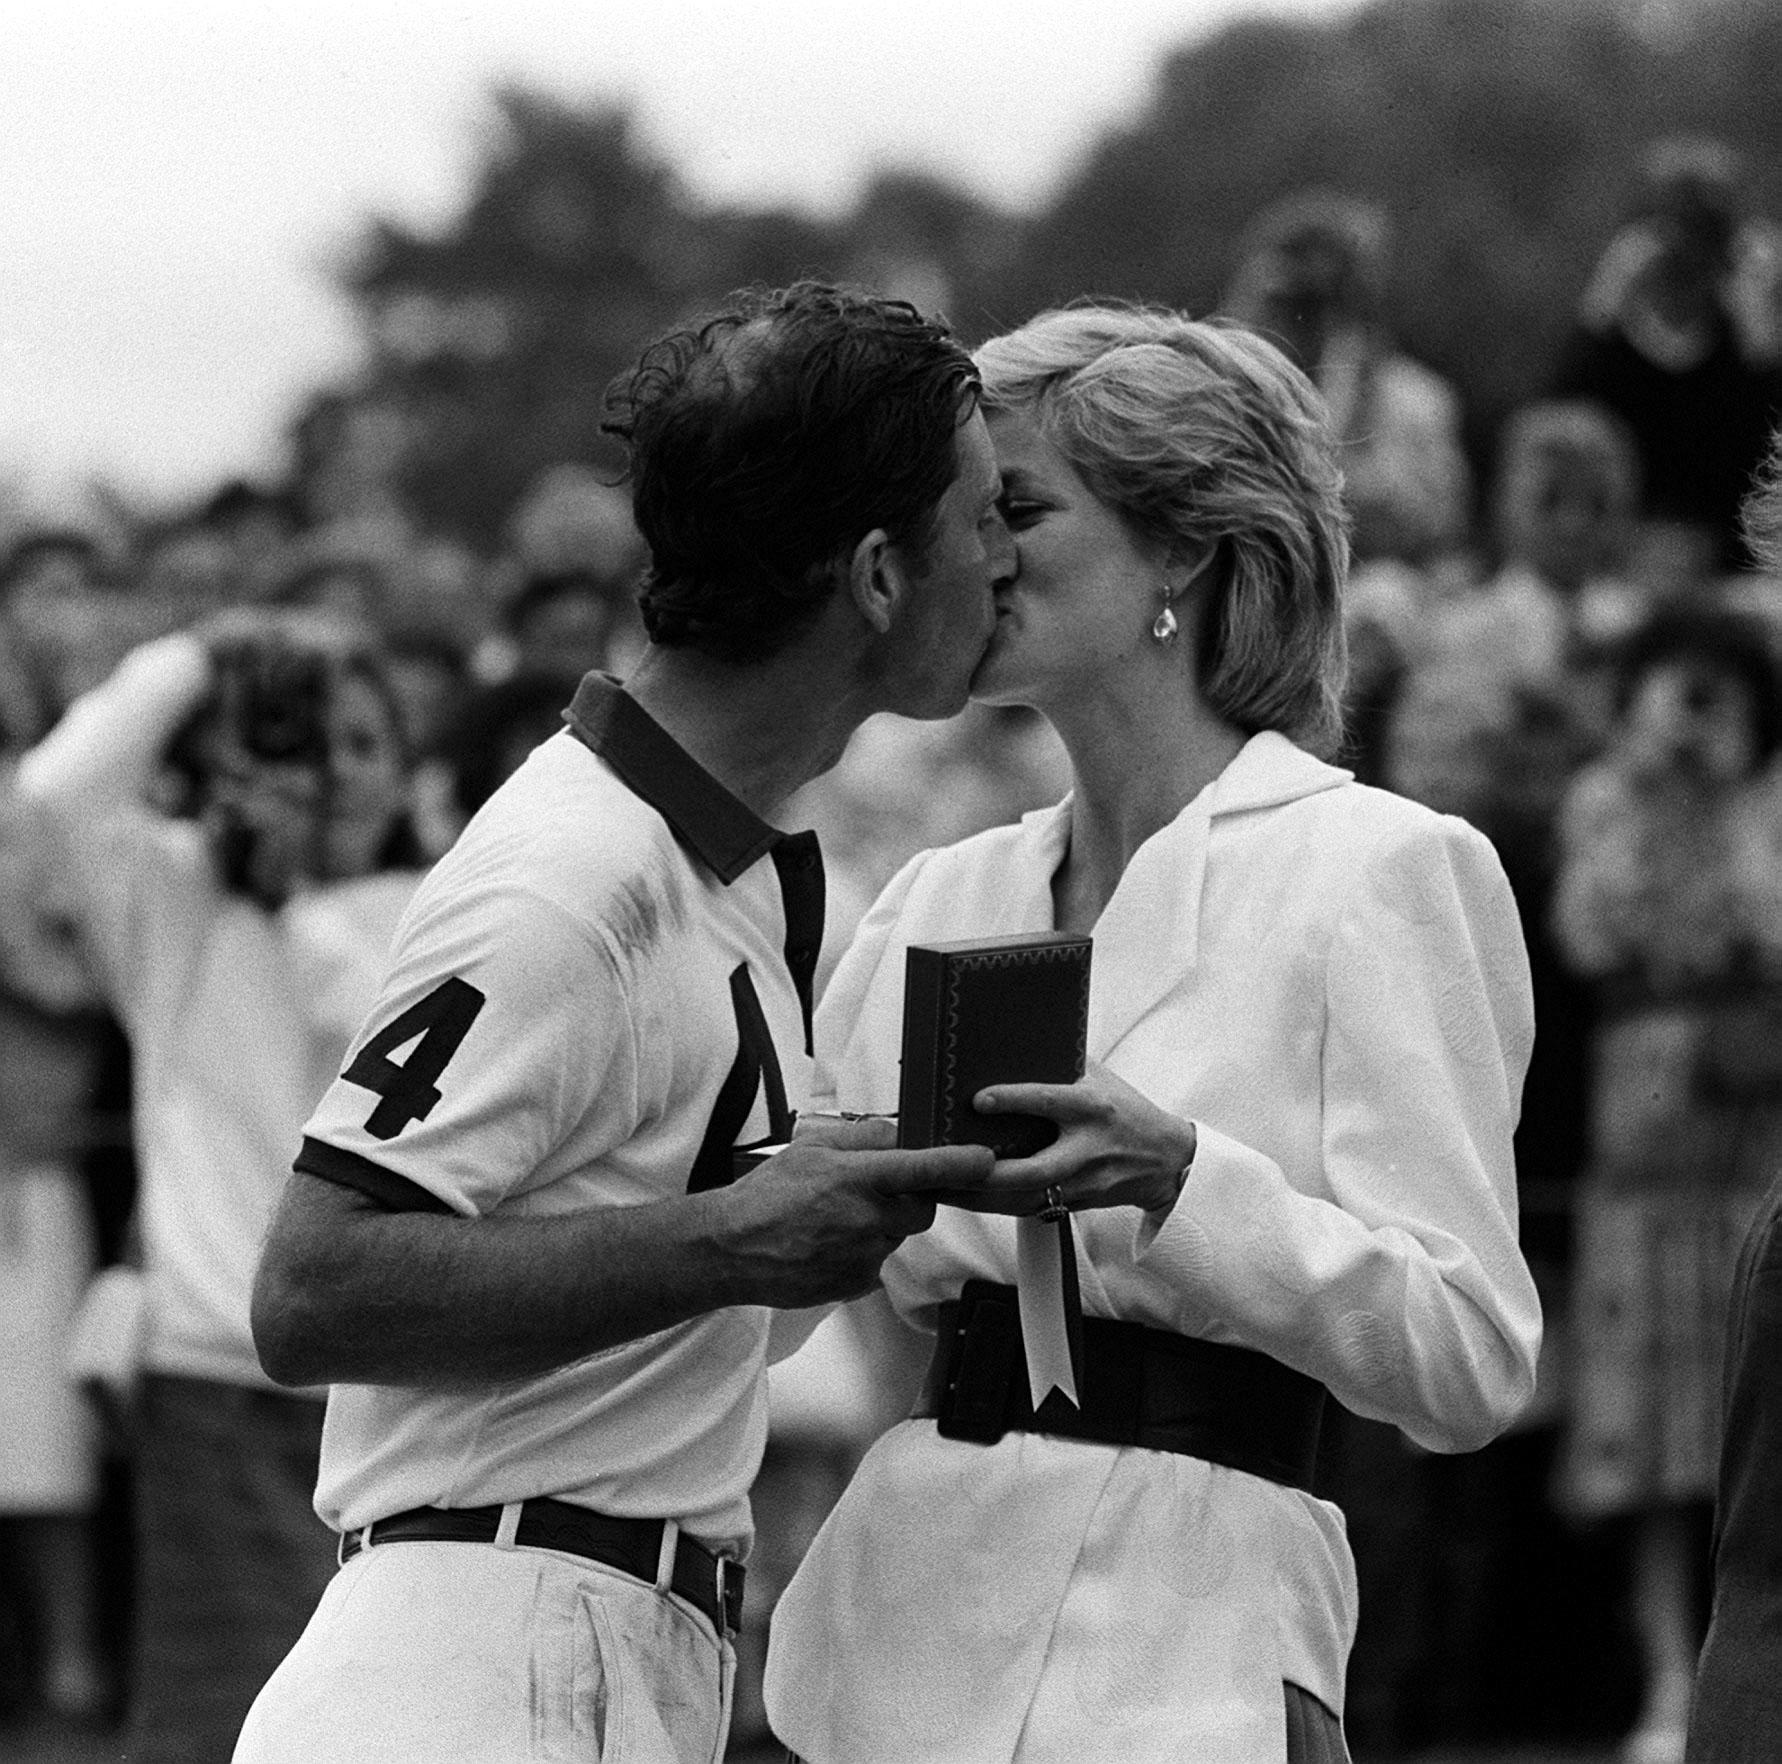 The Princess of Wales presenting her husband, the Prince of Wales, with a prize and a kiss after a polo match in 1986